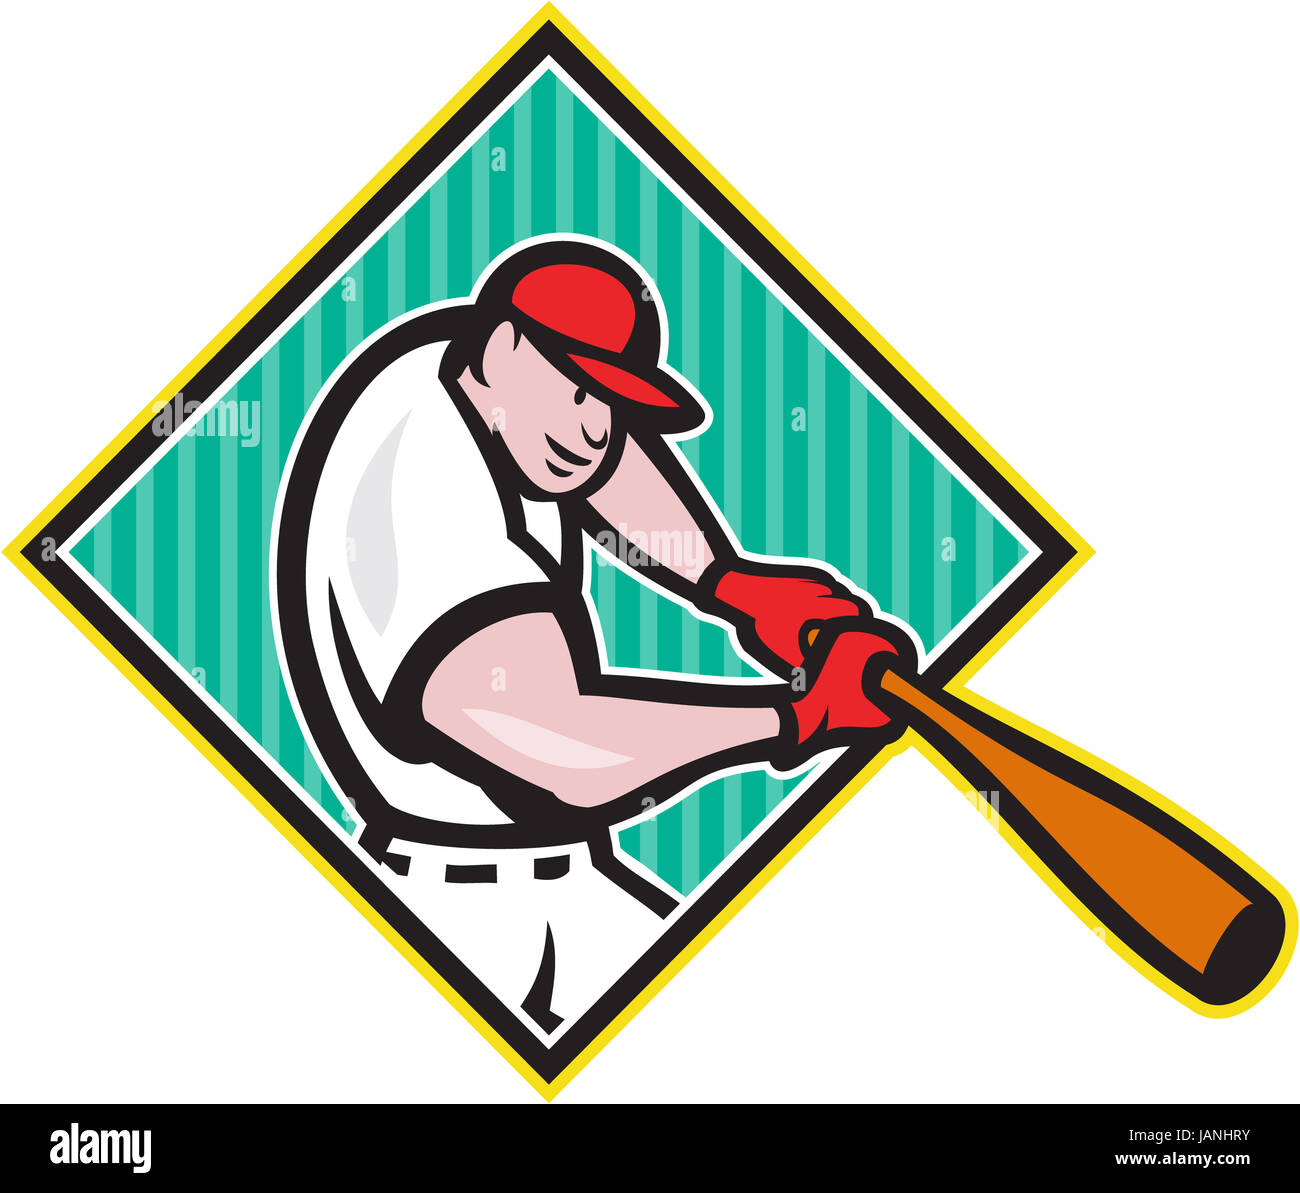 Illustration of a american baseball player batter hitter batting with bat inside diamond shape done in cartoon style isolated on white background. Stock Photo